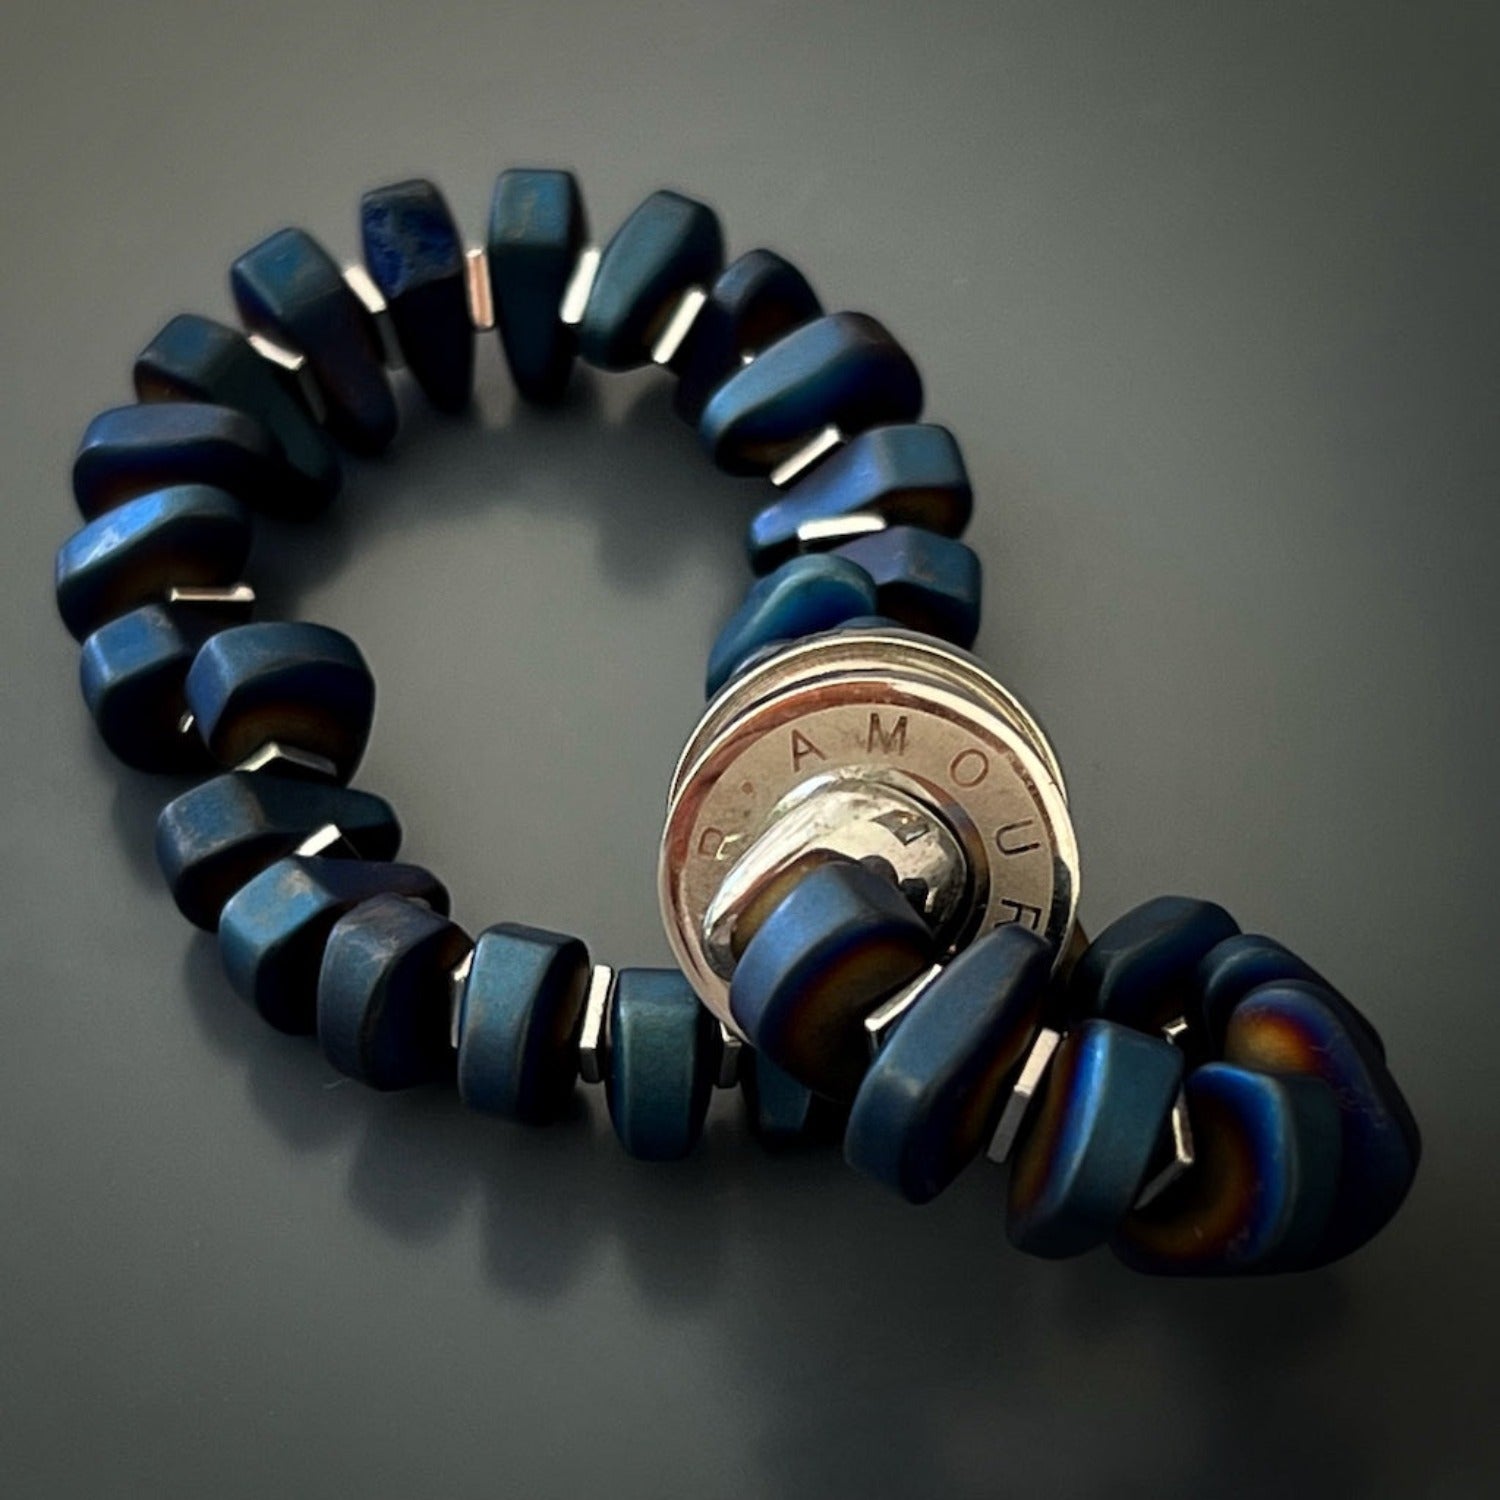 The silver color hematite stone spacers adding a stylish touch to the Blue Amour Men Bracelet